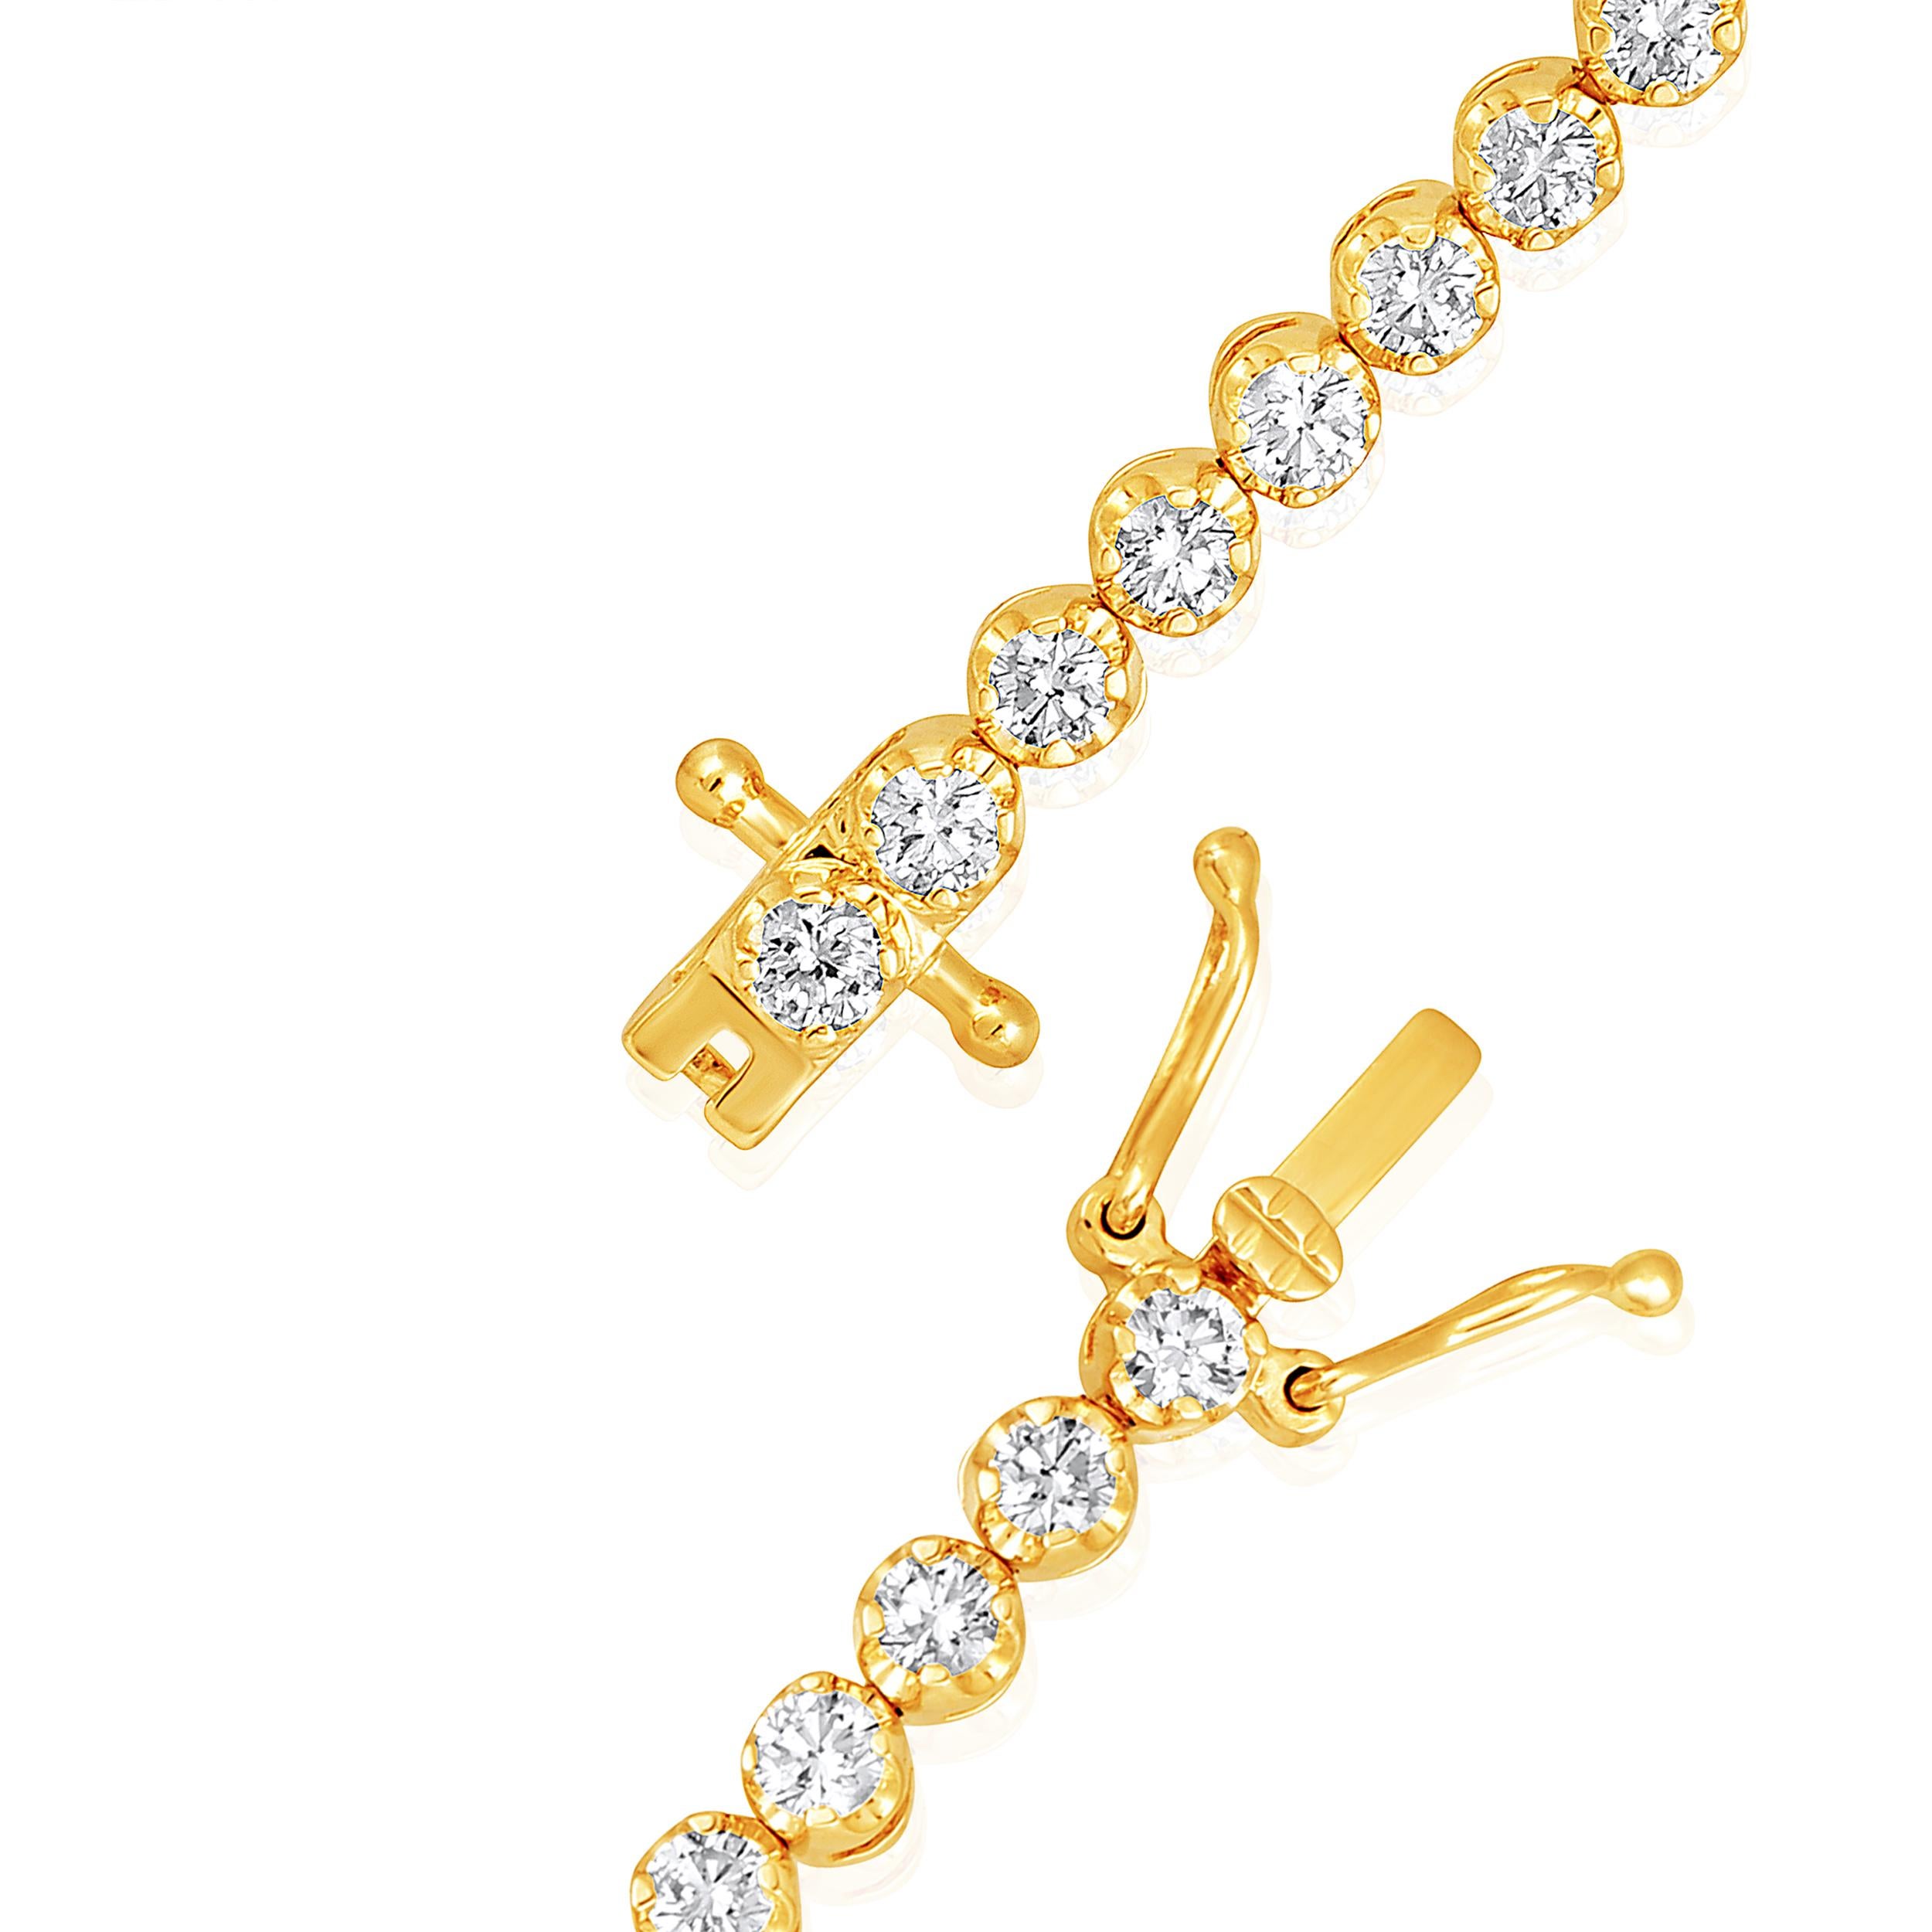 Crafted in 8.23 grams of 14K Yellow Gold, the bracelet contains 55 stones of Round Diamonds with a total of 3.03 carat in G-H color and VS-SI carat. The bracelet length is 7 inches.
This jewelry piece will be expertly crafted by our skilled artisans